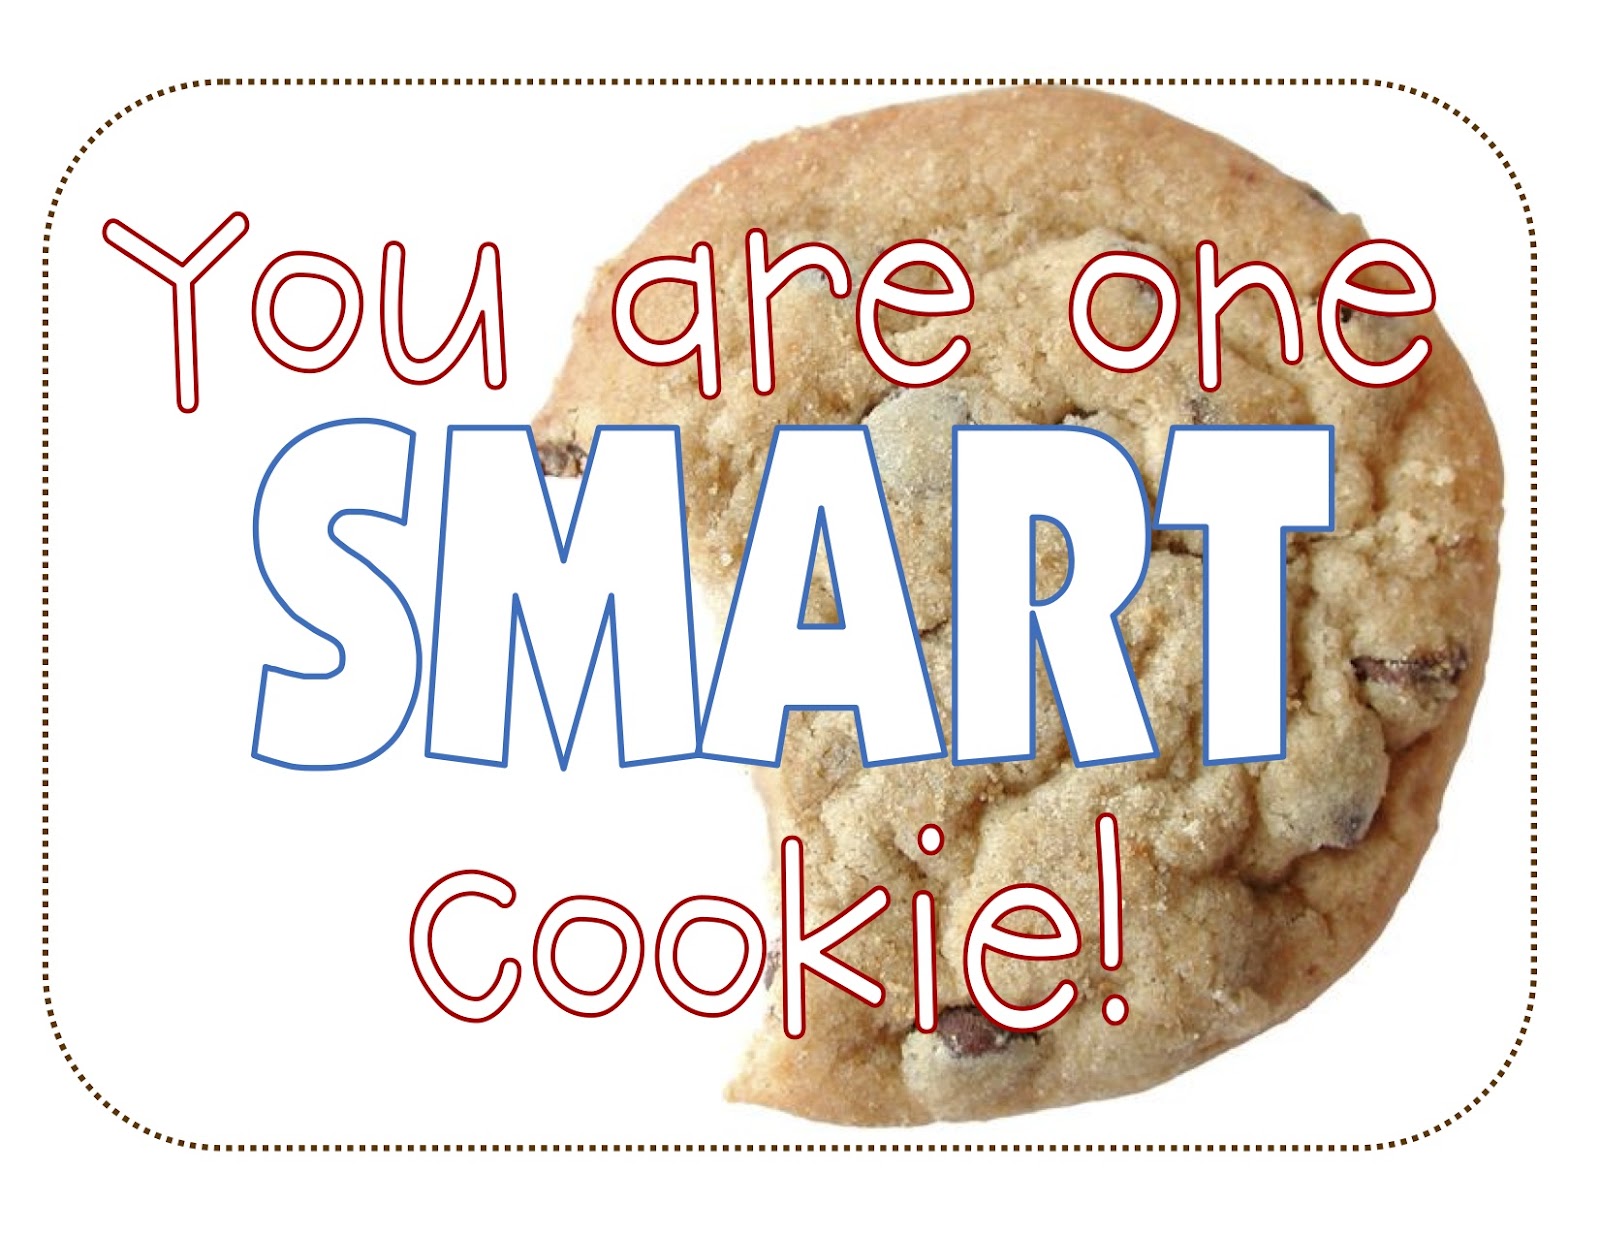 The Half Full Chronicles One Smart Cookie!